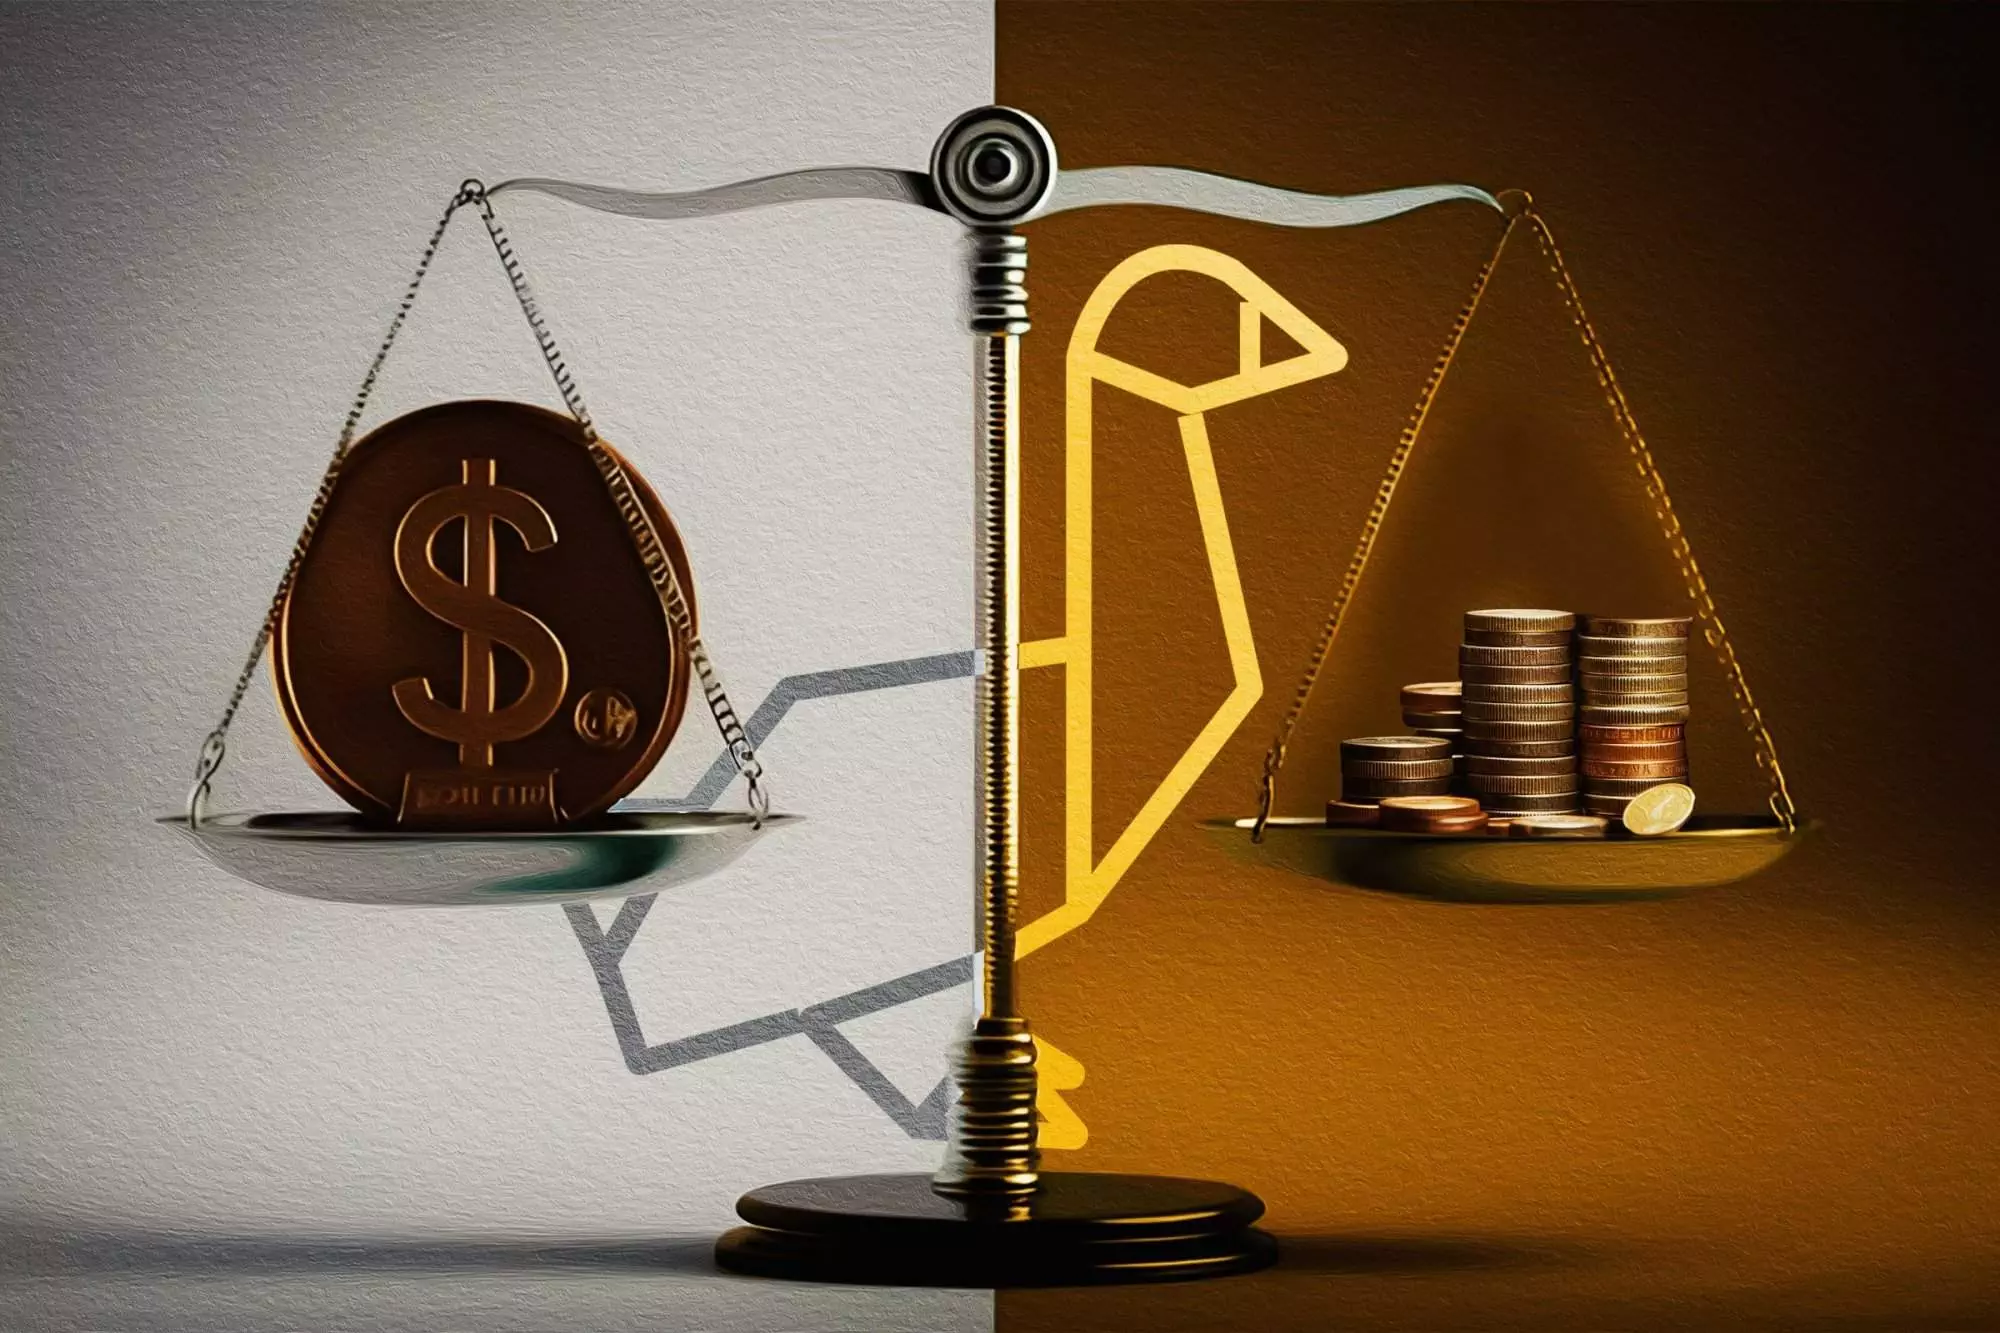 Balanced scale representing cost reduction for healthcare providers, with dollar sign on one side and stacked coins on the other.